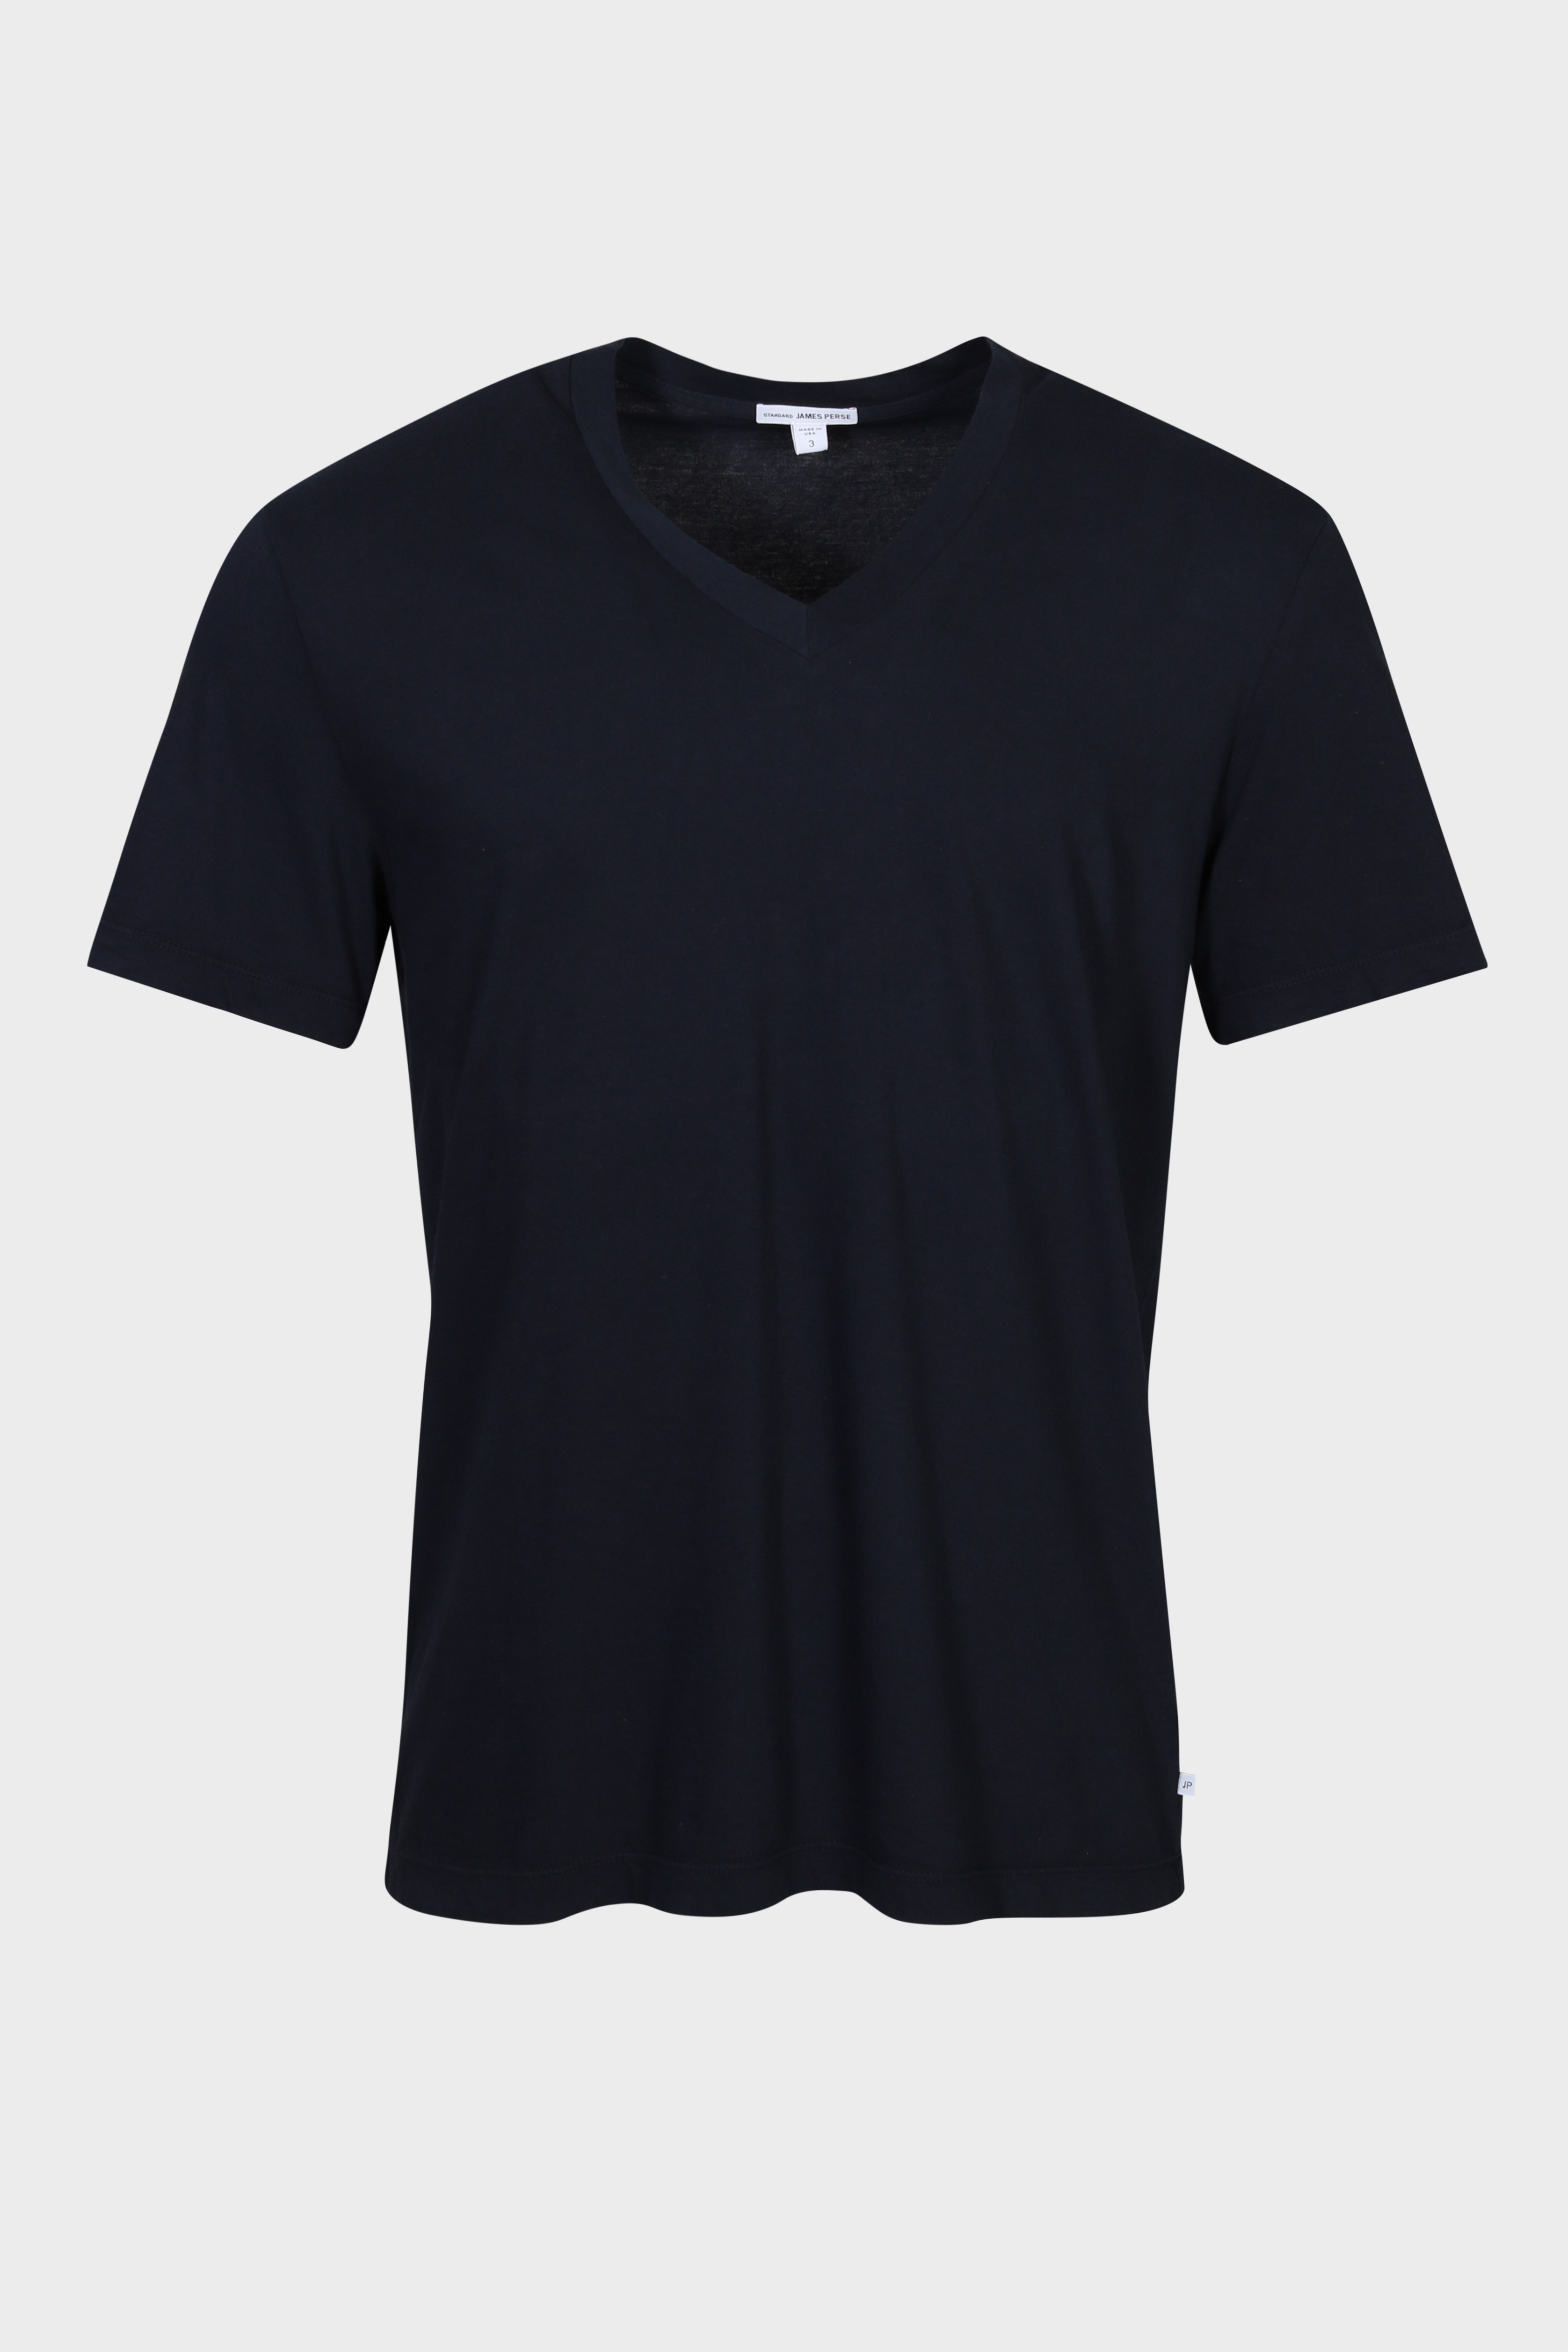 JAMES PERSE  Clear Jersey V-Neck in Navy